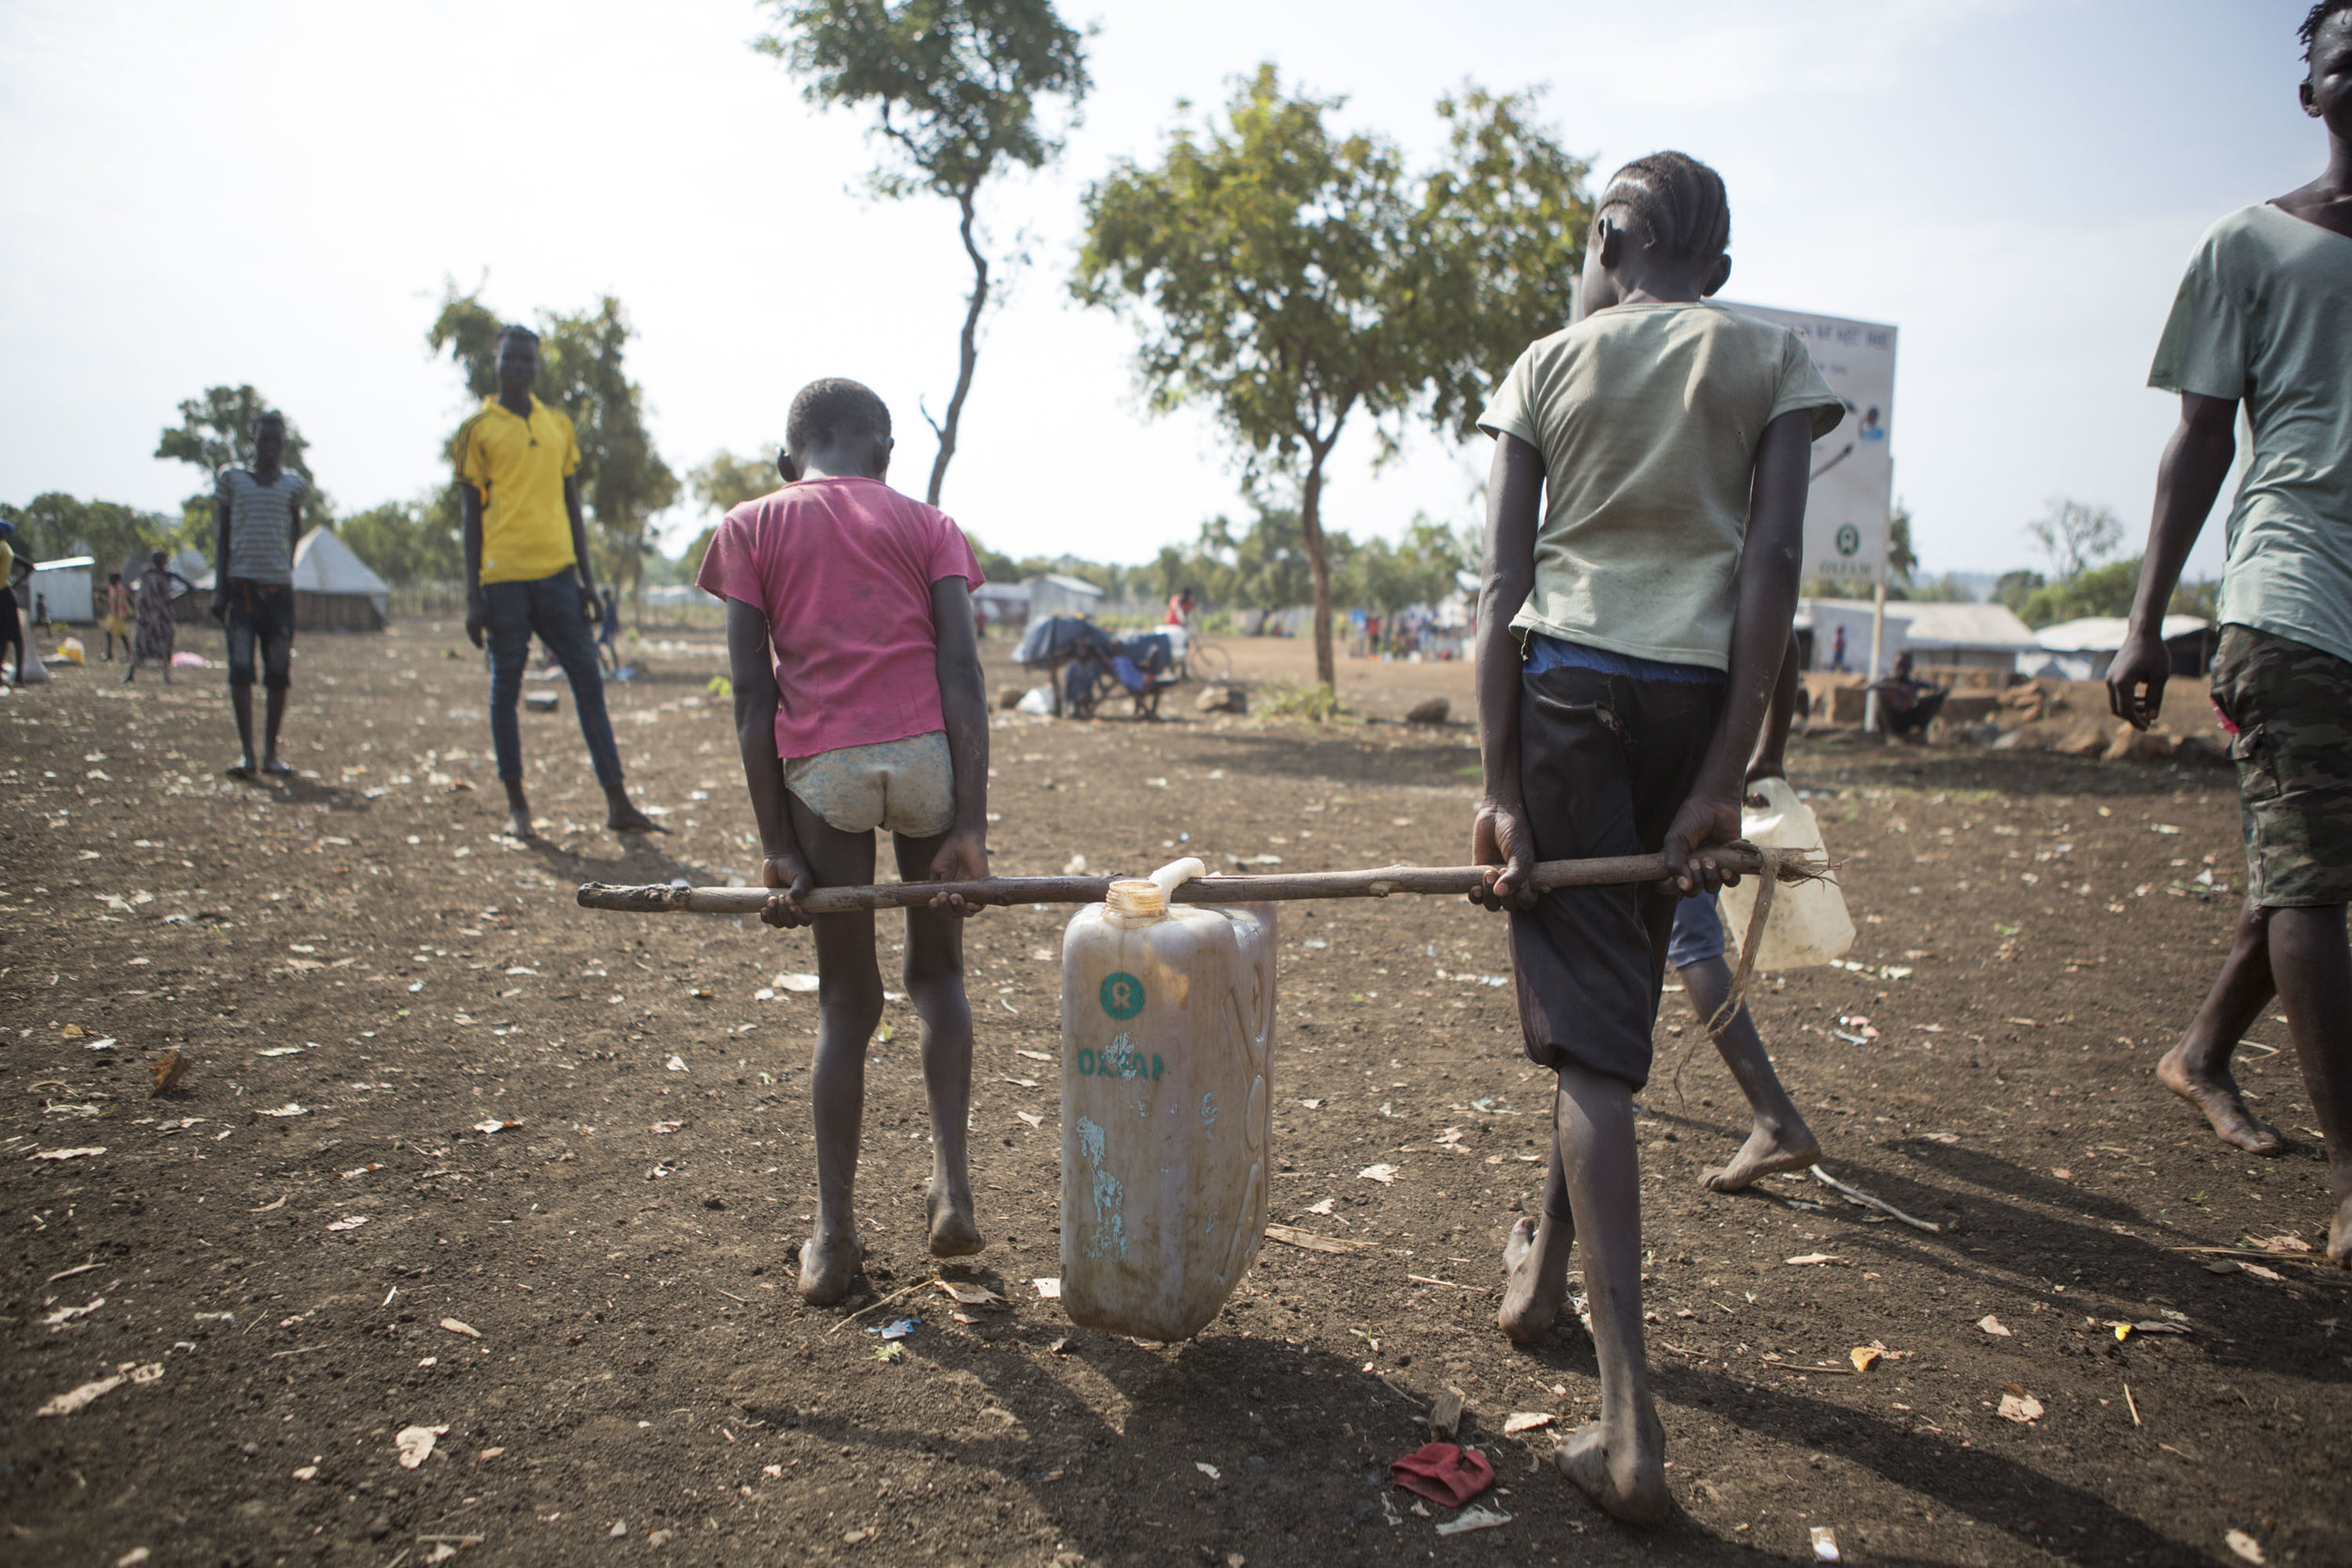  Two girls carry back a jerry can of water together in the Nguneyyiel &nbsp;refugee camp in the Gambella region of Ethiopia on 26 Nov 2017. MSF / Zacharias Abubeker 